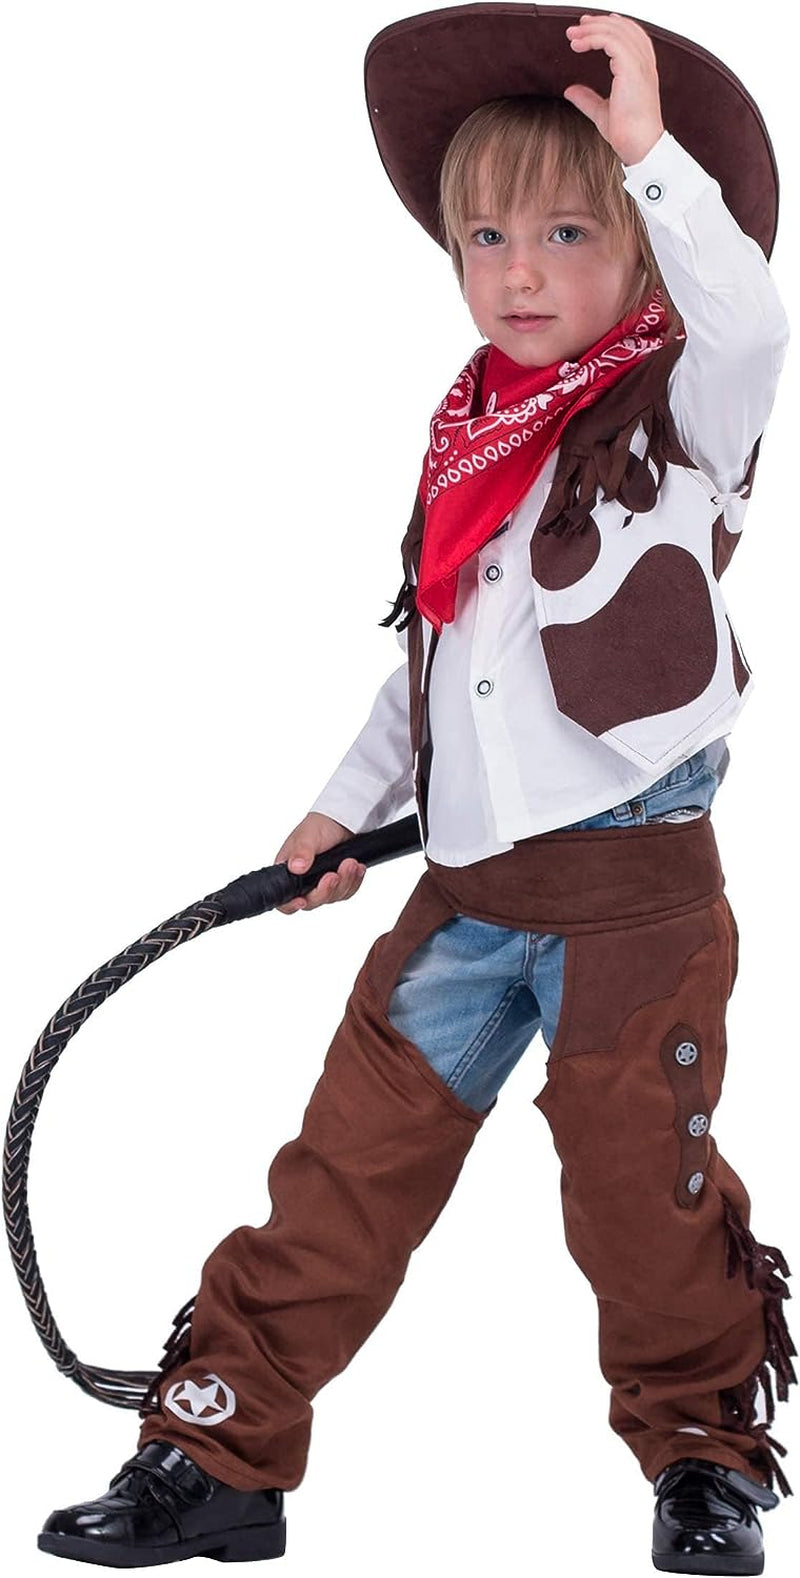 Spooktacular Creations Cowboy Costume Deluxe Set for Kids Halloween Party Dress Up,Role Play and Cosplay (S(5-7Yr))  Joyin Inc   